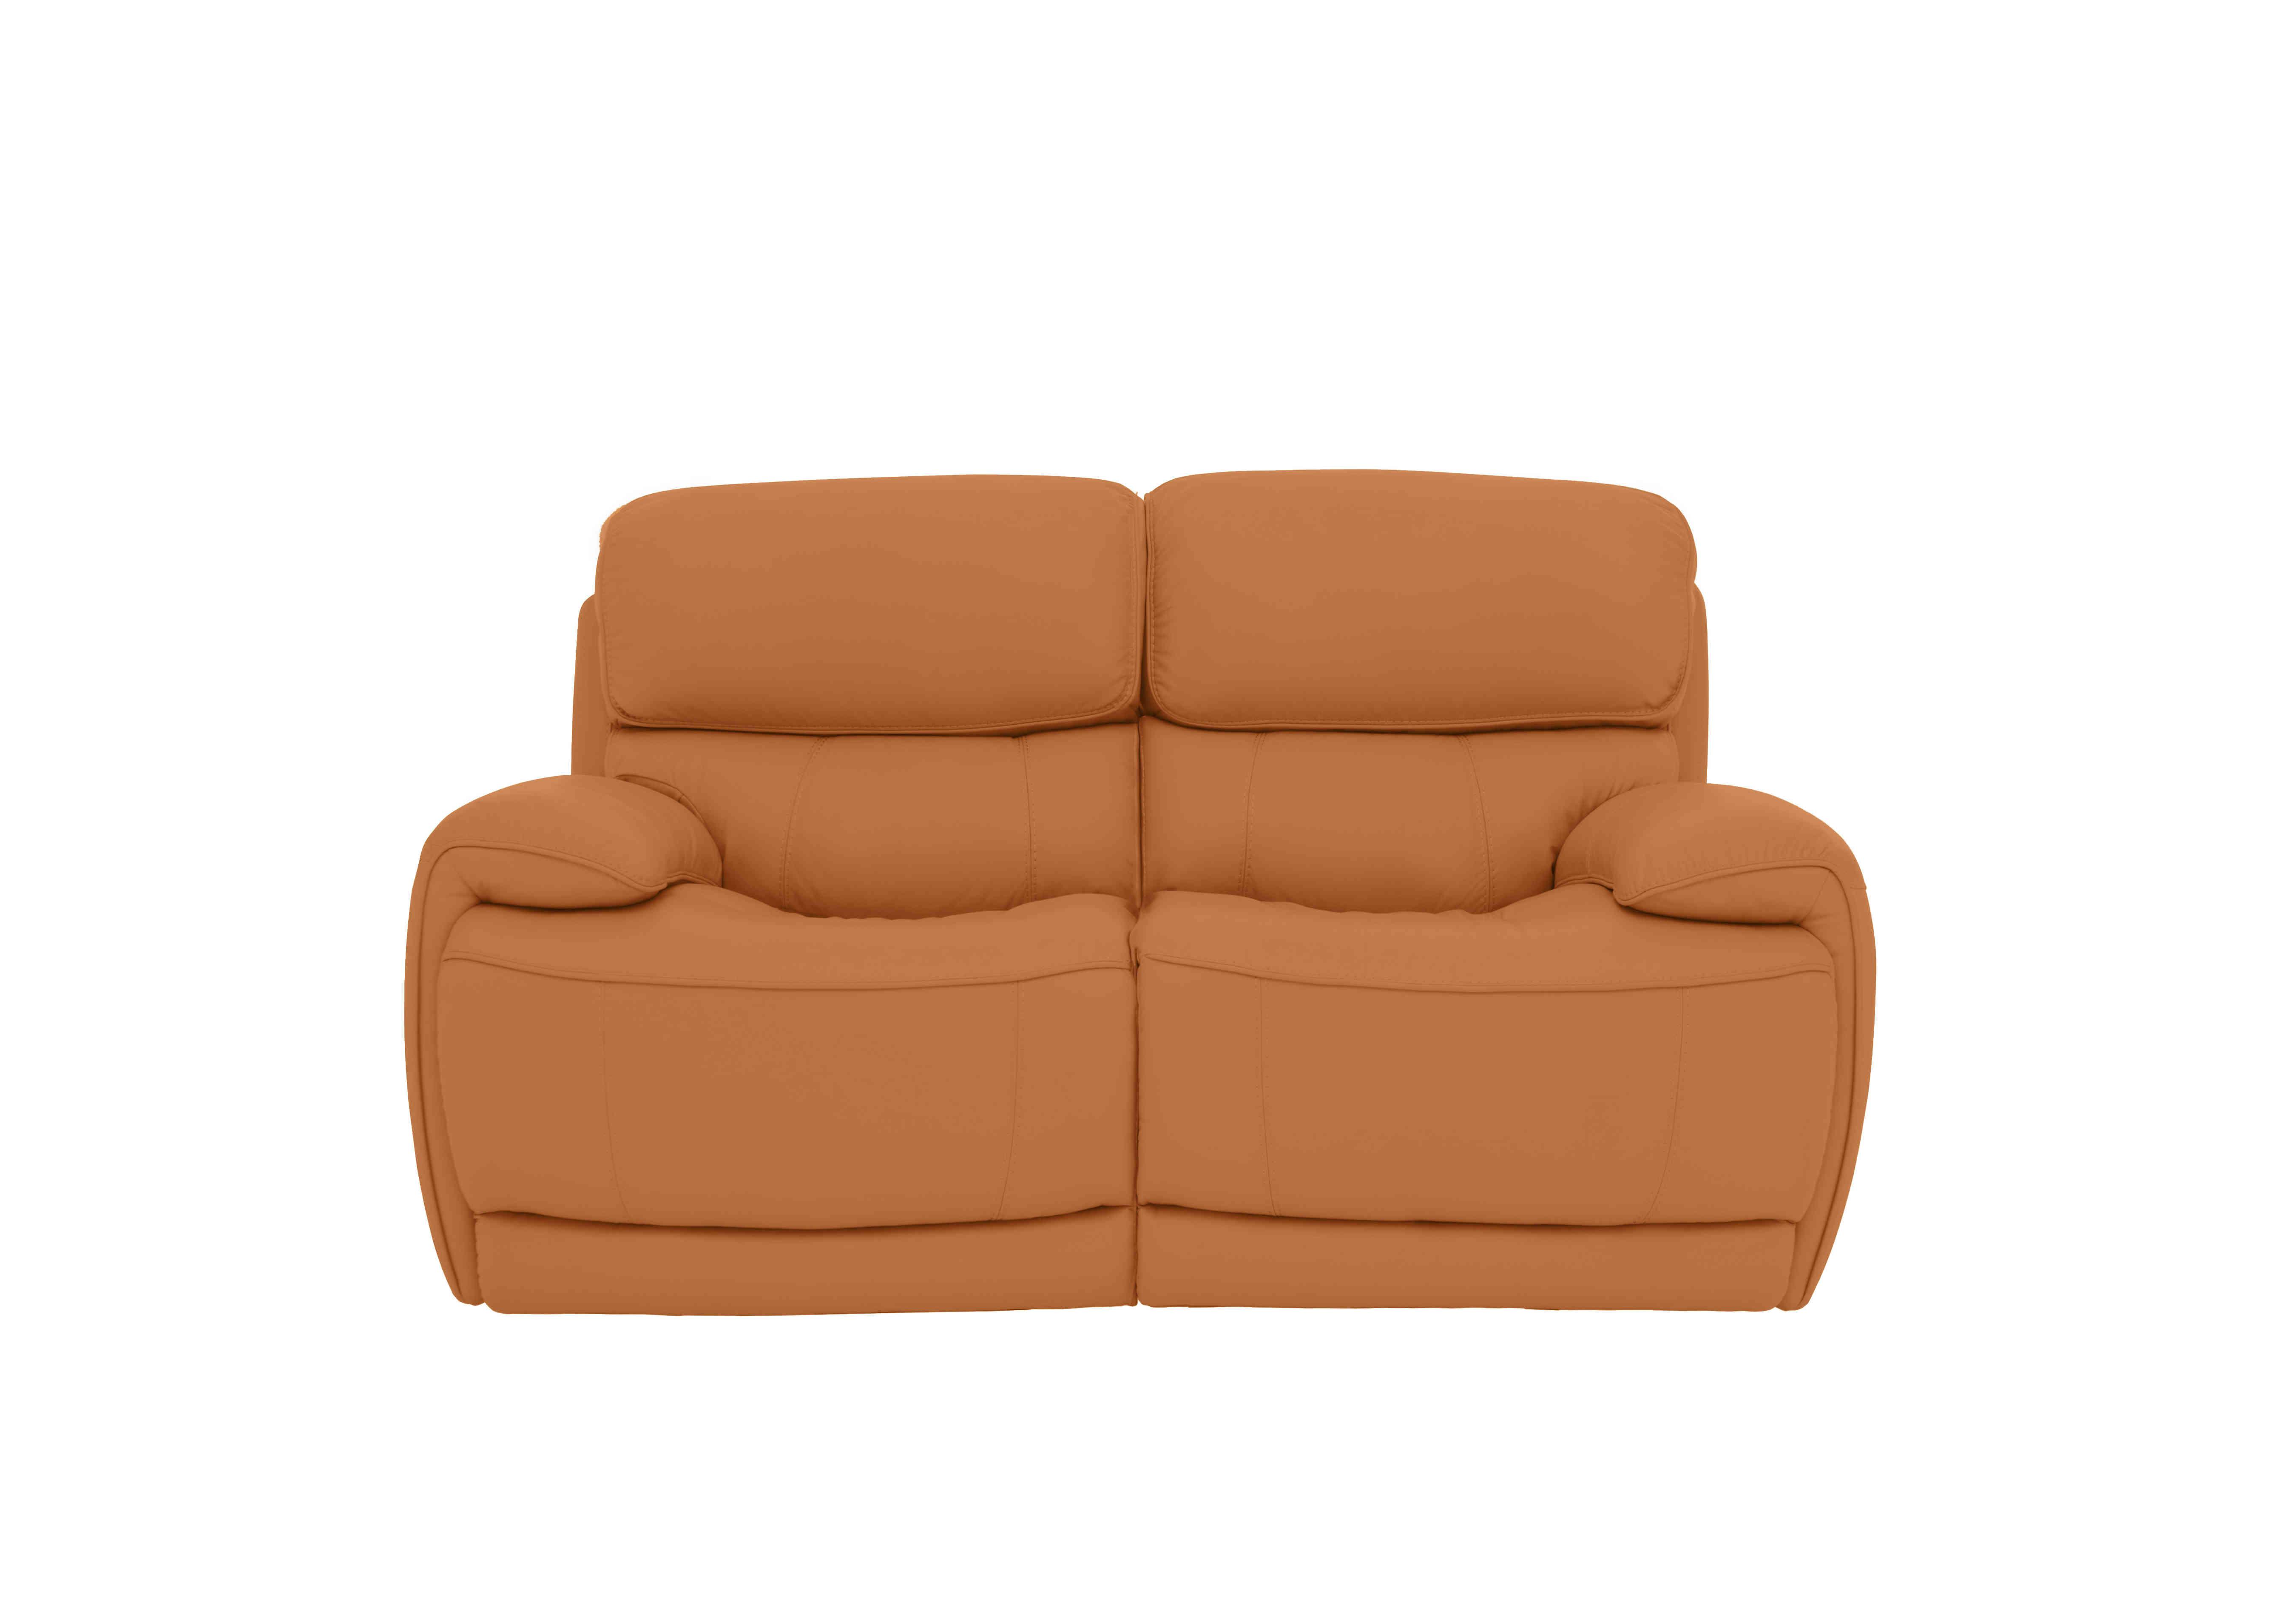 Rocco 2 Seater Leather Power Rocker Sofa with Power Headrests in Bv-335e Honey Yellow on Furniture Village